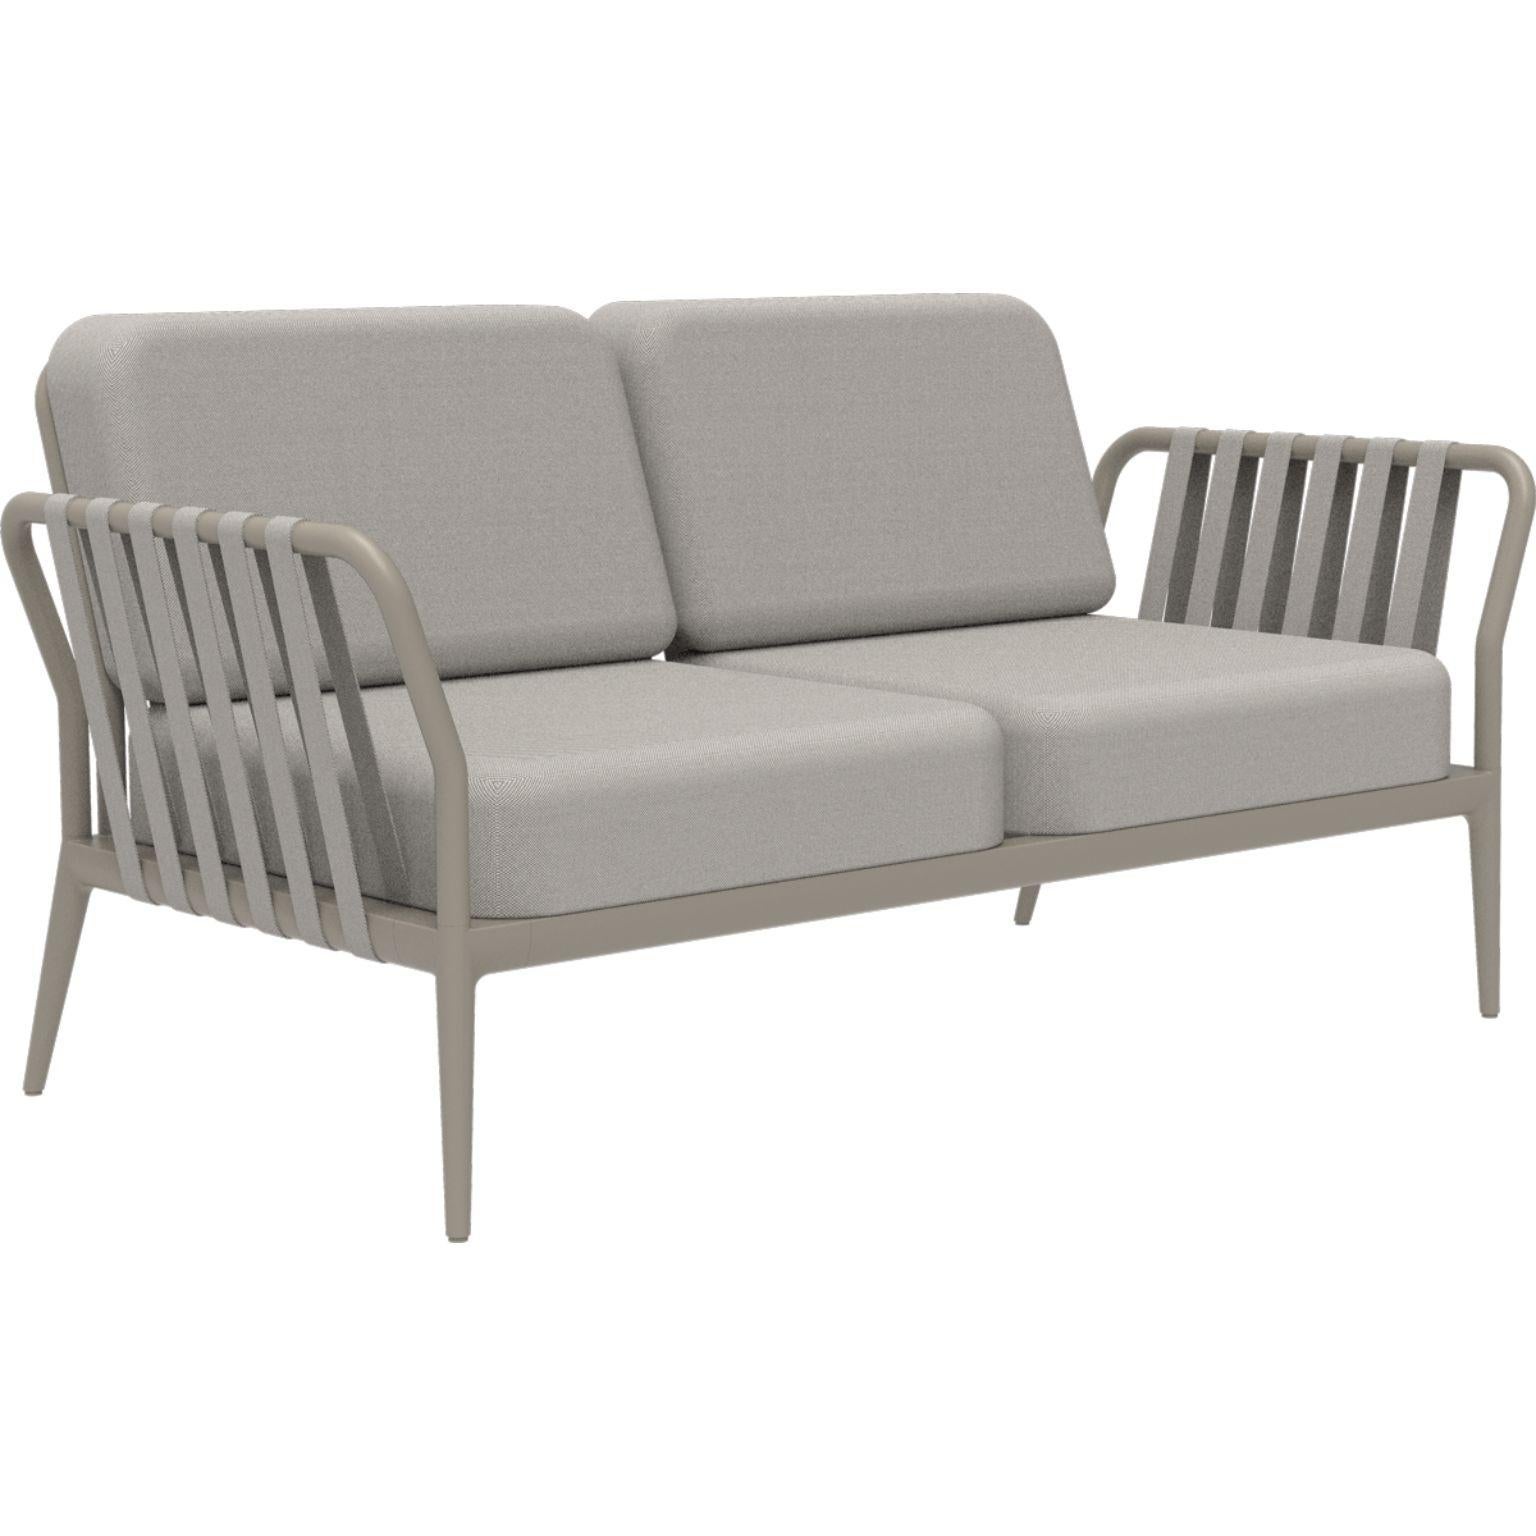 Ribbons Cream sofa by MOWEE
Dimensions: D83 x W160 x H81 cm
Material: Aluminum, Upholstery
Weight: 32 kg
Also available in different colors and finishes. 

An unmistakable collection for its beauty and robustness. A tribute to the Valencian